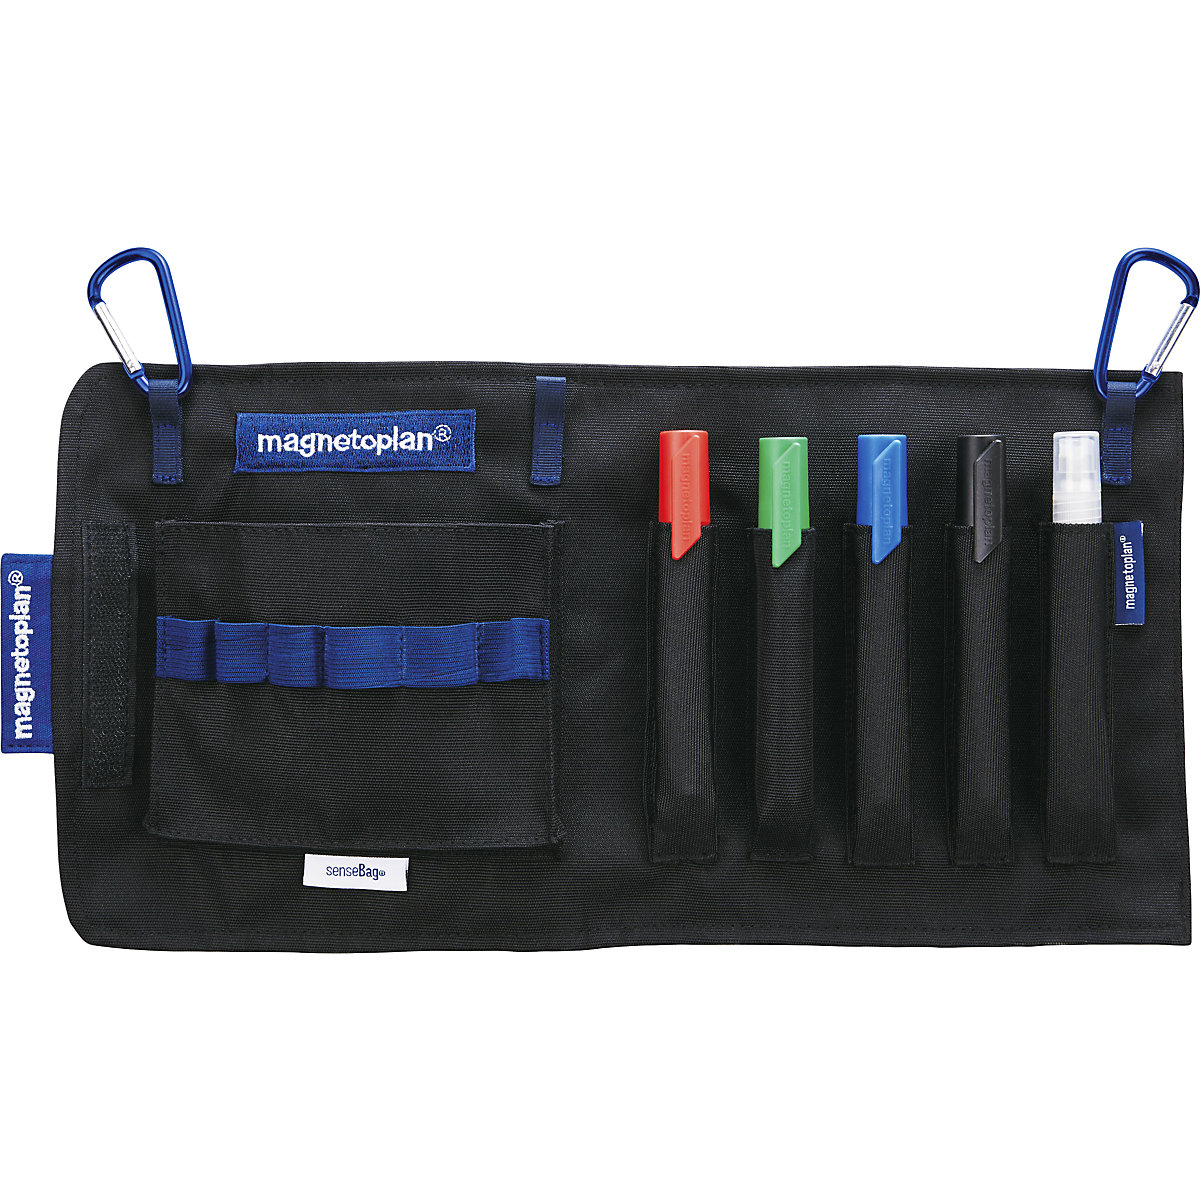 ACTION WALLET presentation pouch – magnetoplan